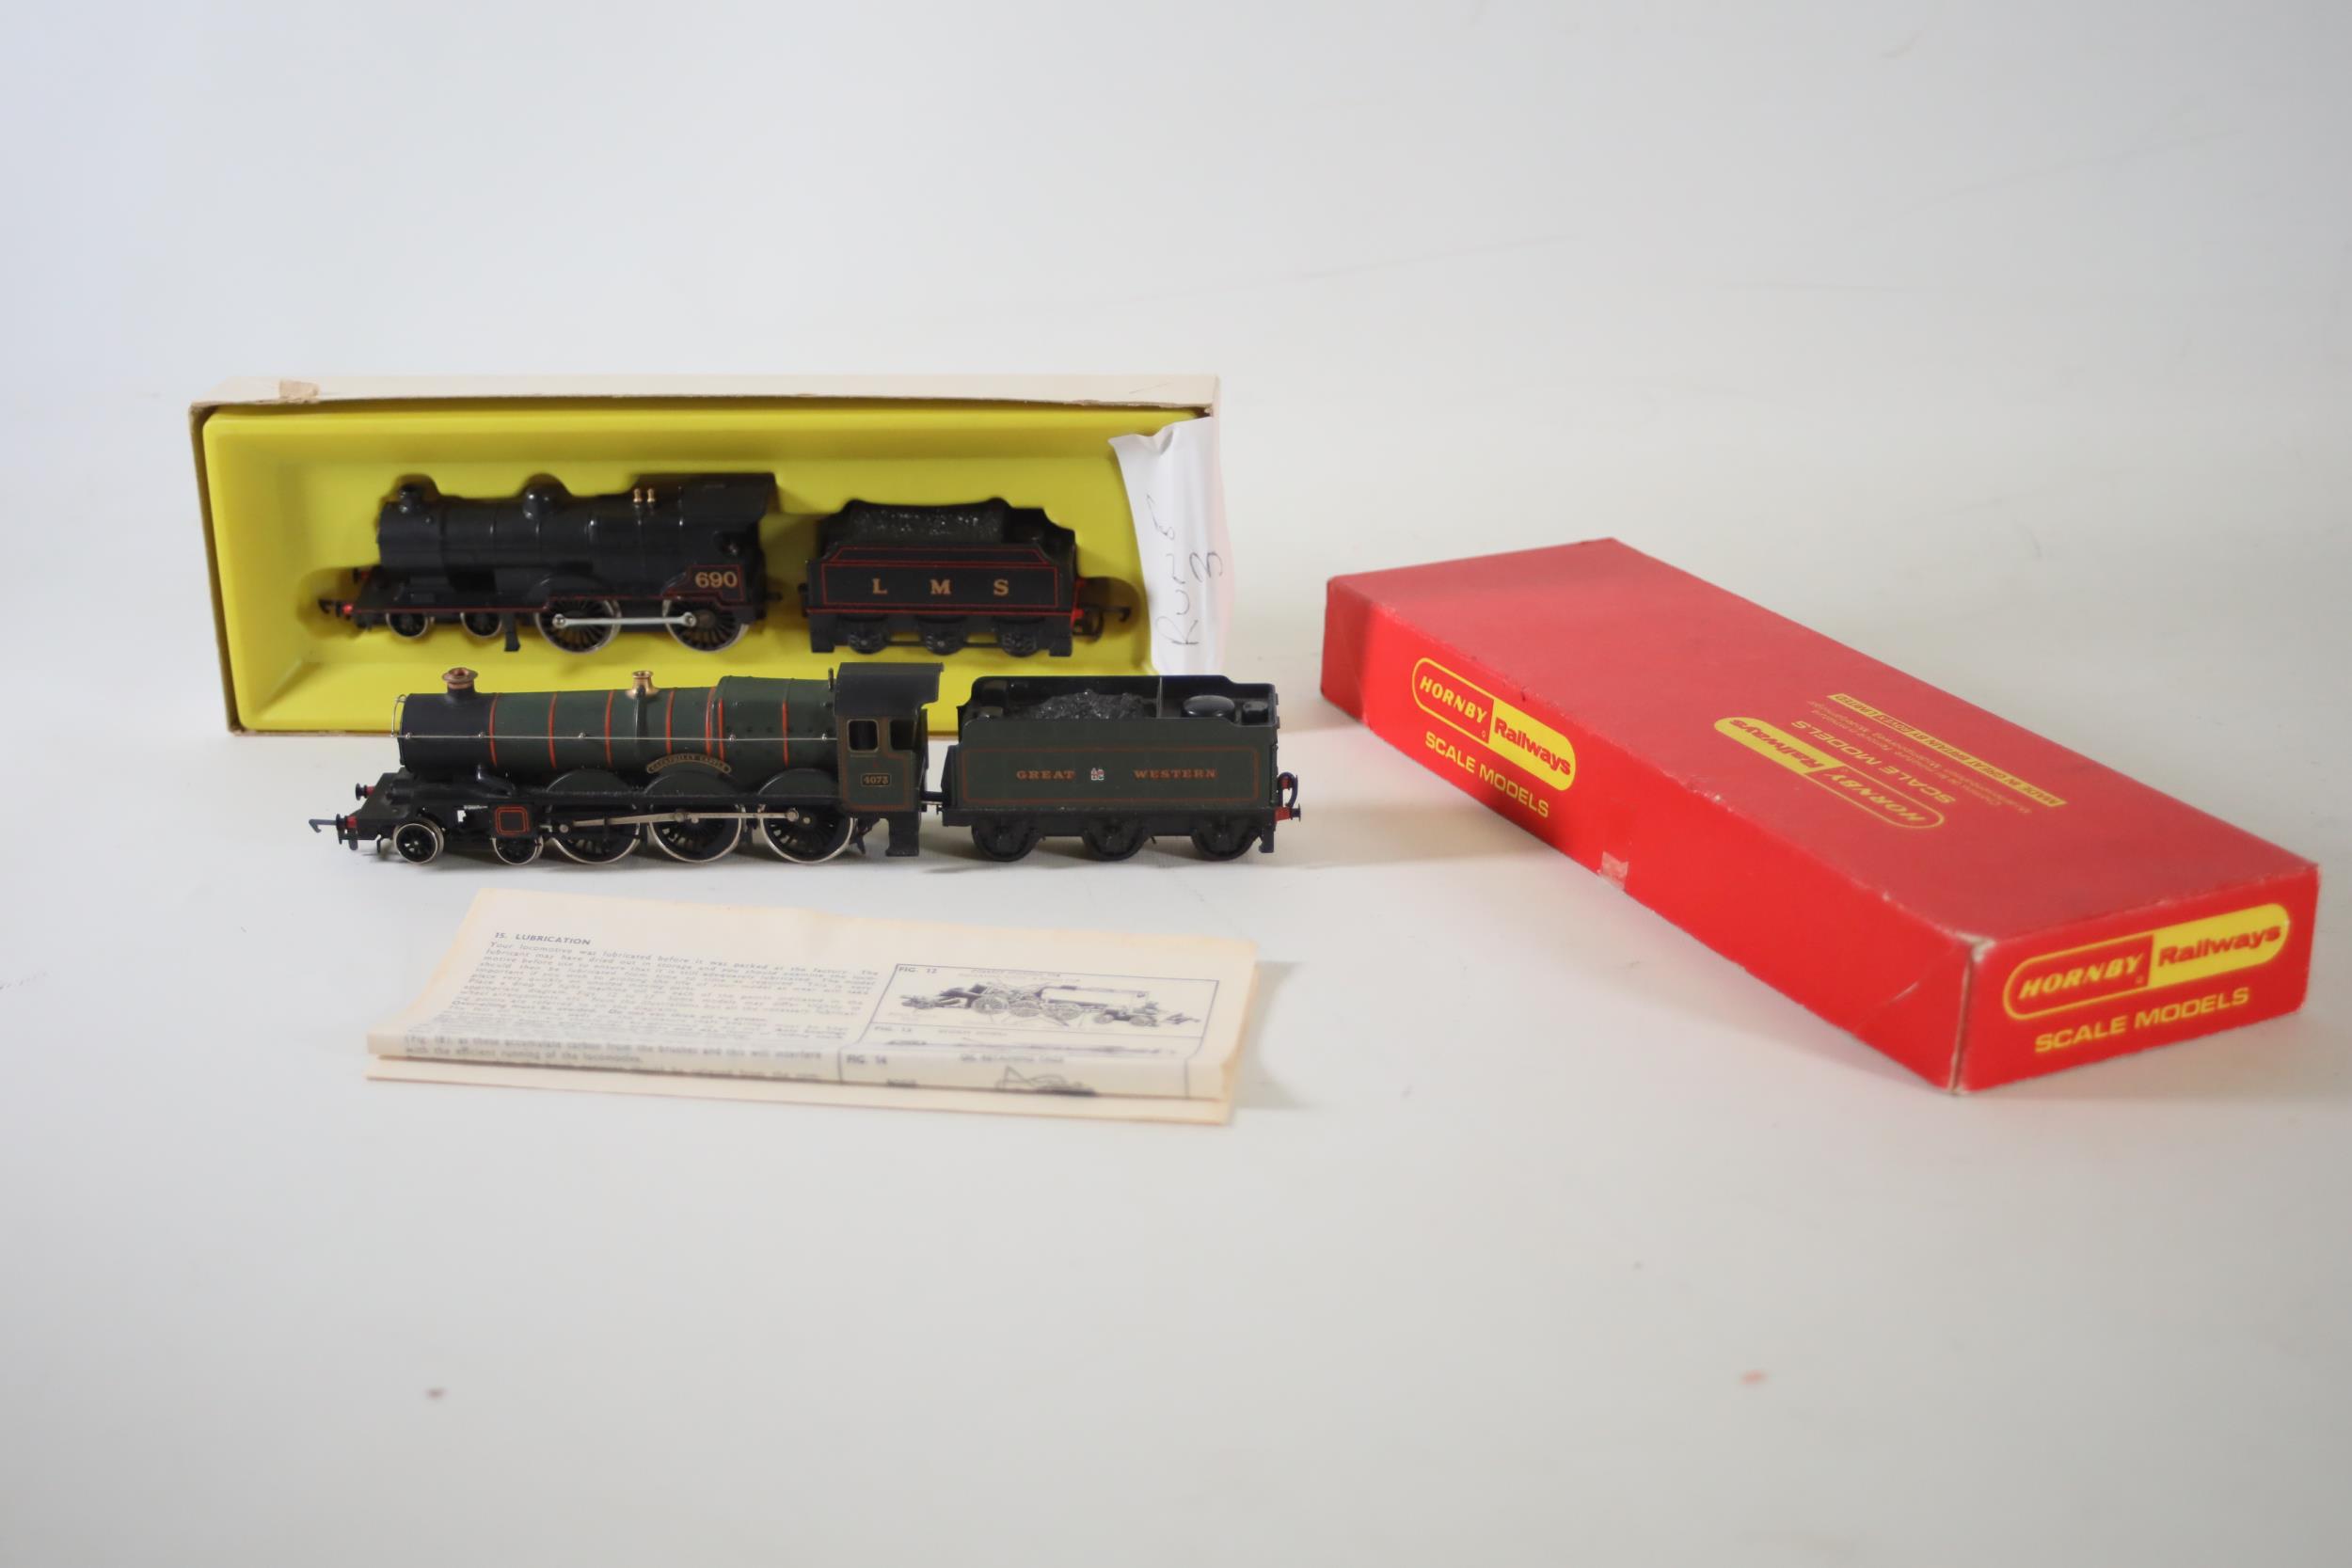 2 OO Gauge Locomotives 1 Hornby 1 Airfix LMS 690 Caerphilly Castle 4037 - Image 5 of 22